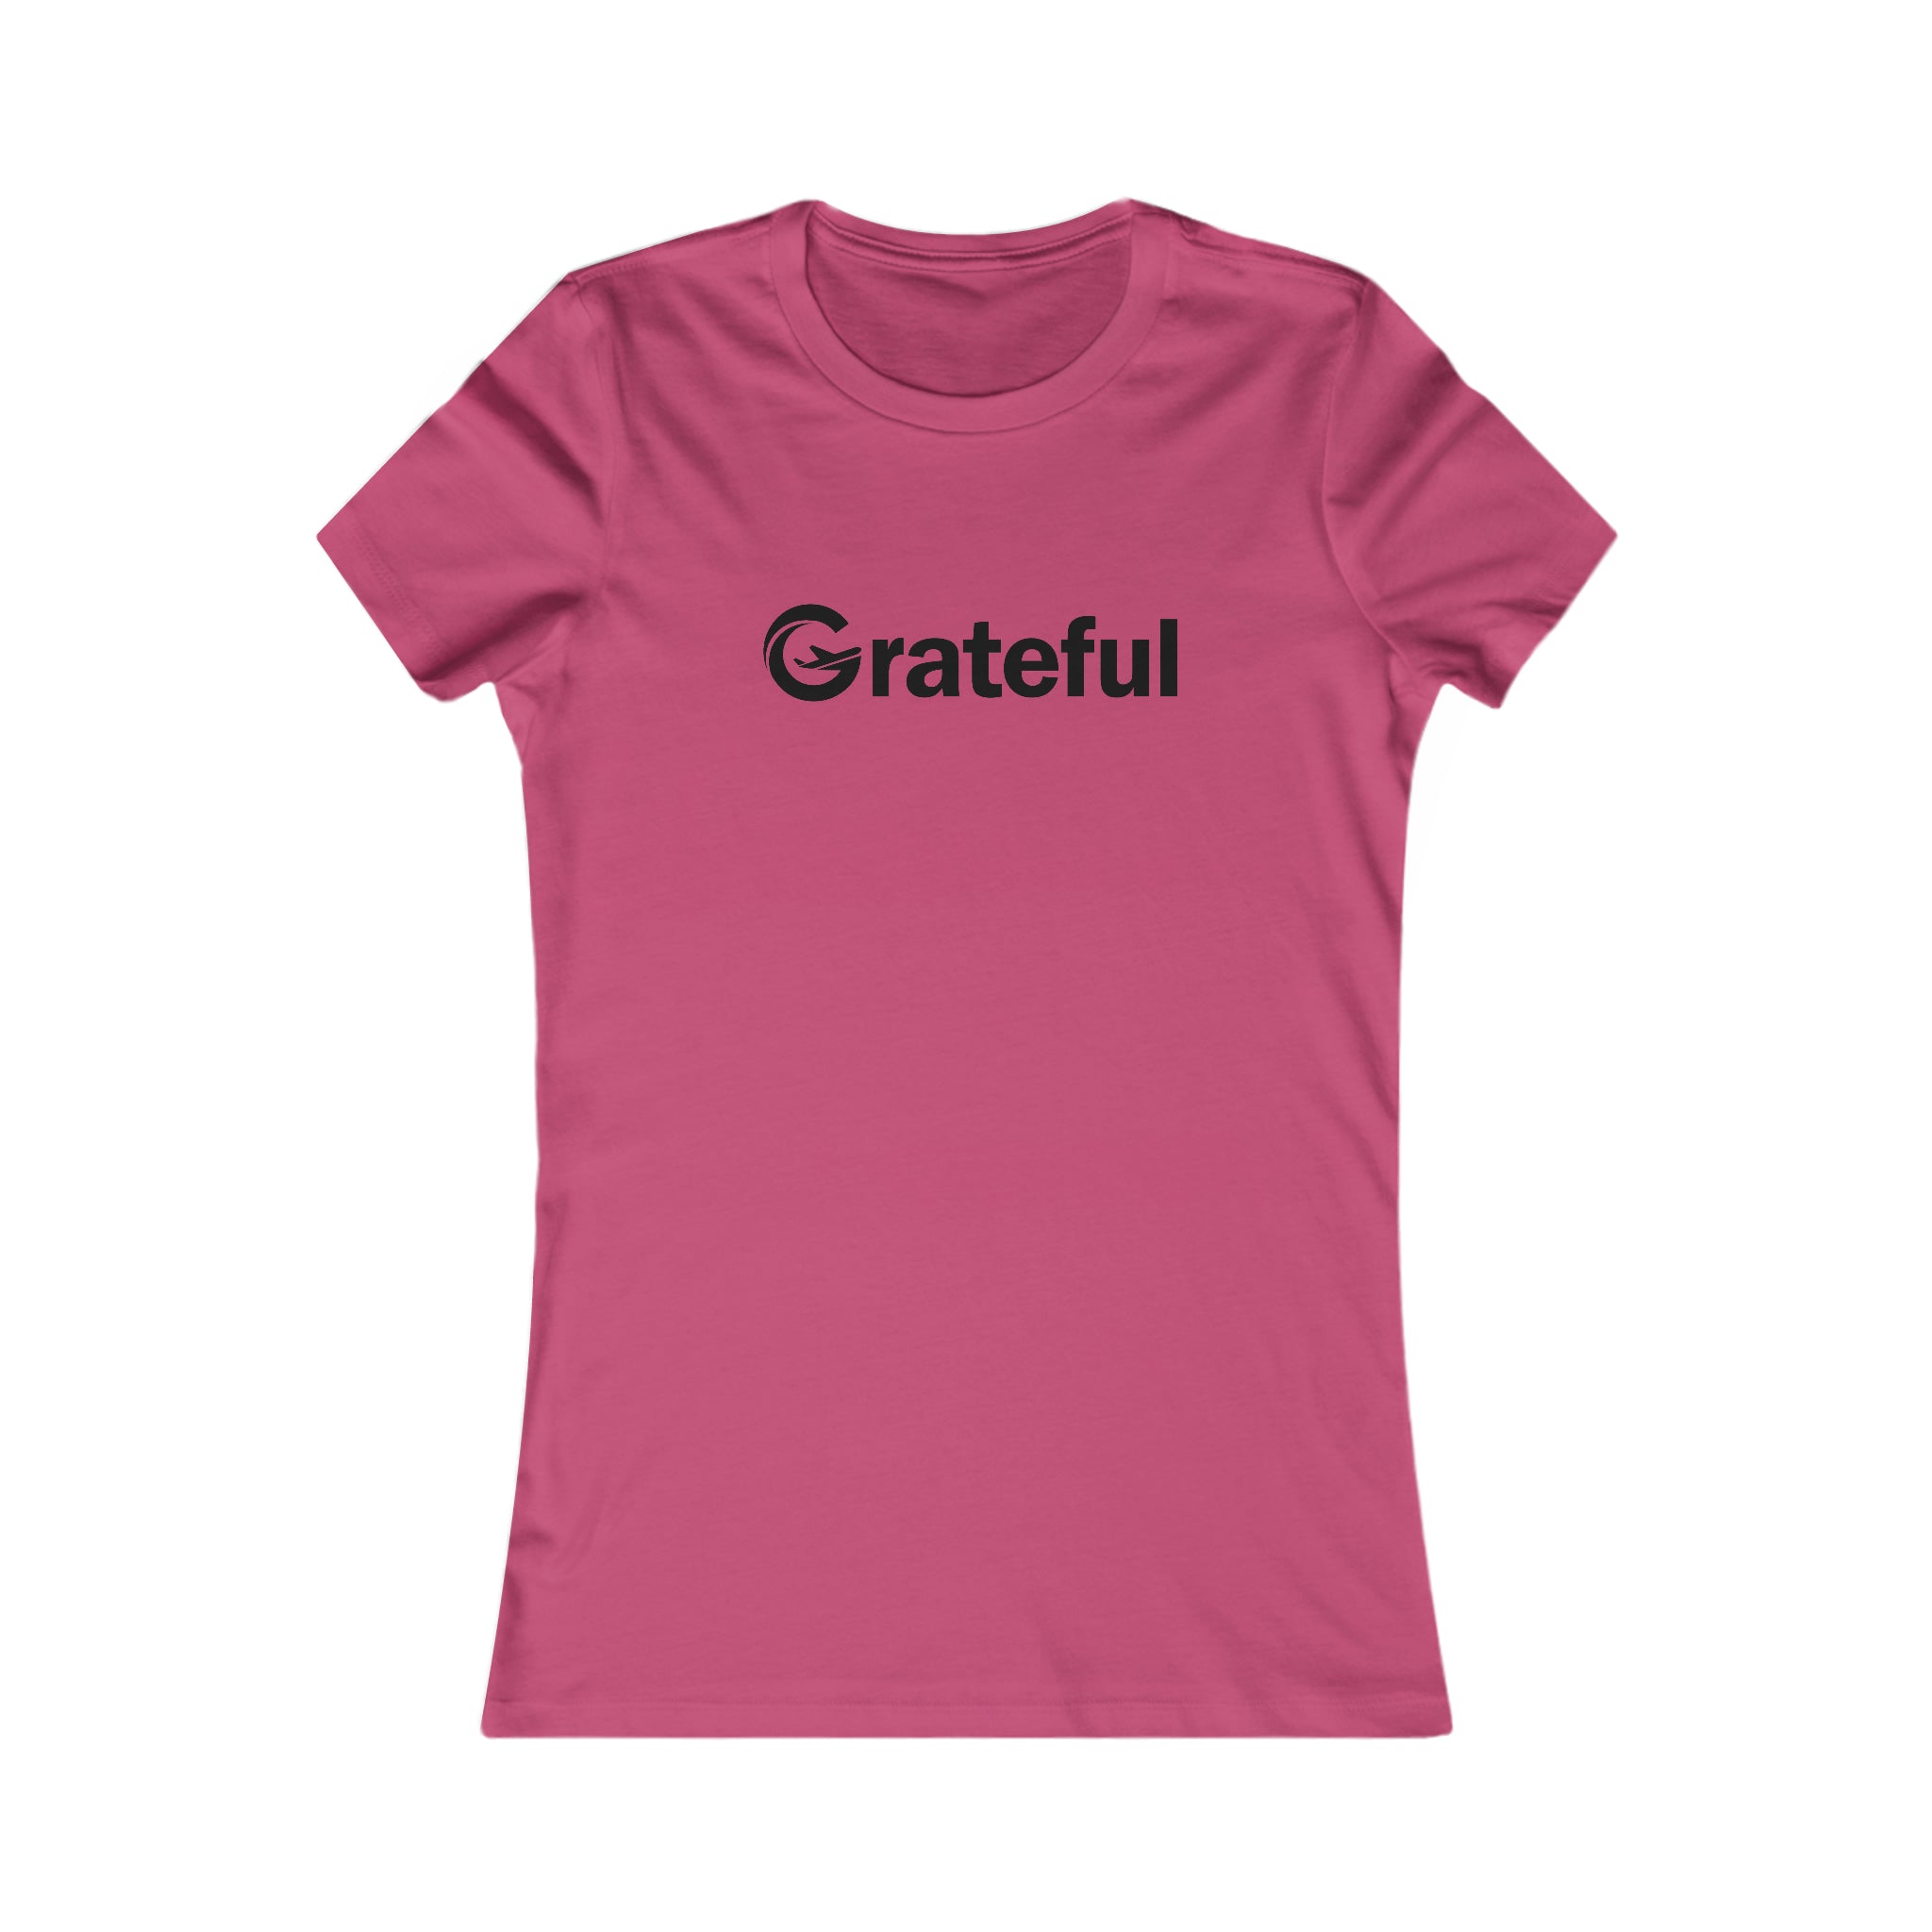 Grateful Women's Fitted Tee (Black Lettering Multiple Colors)